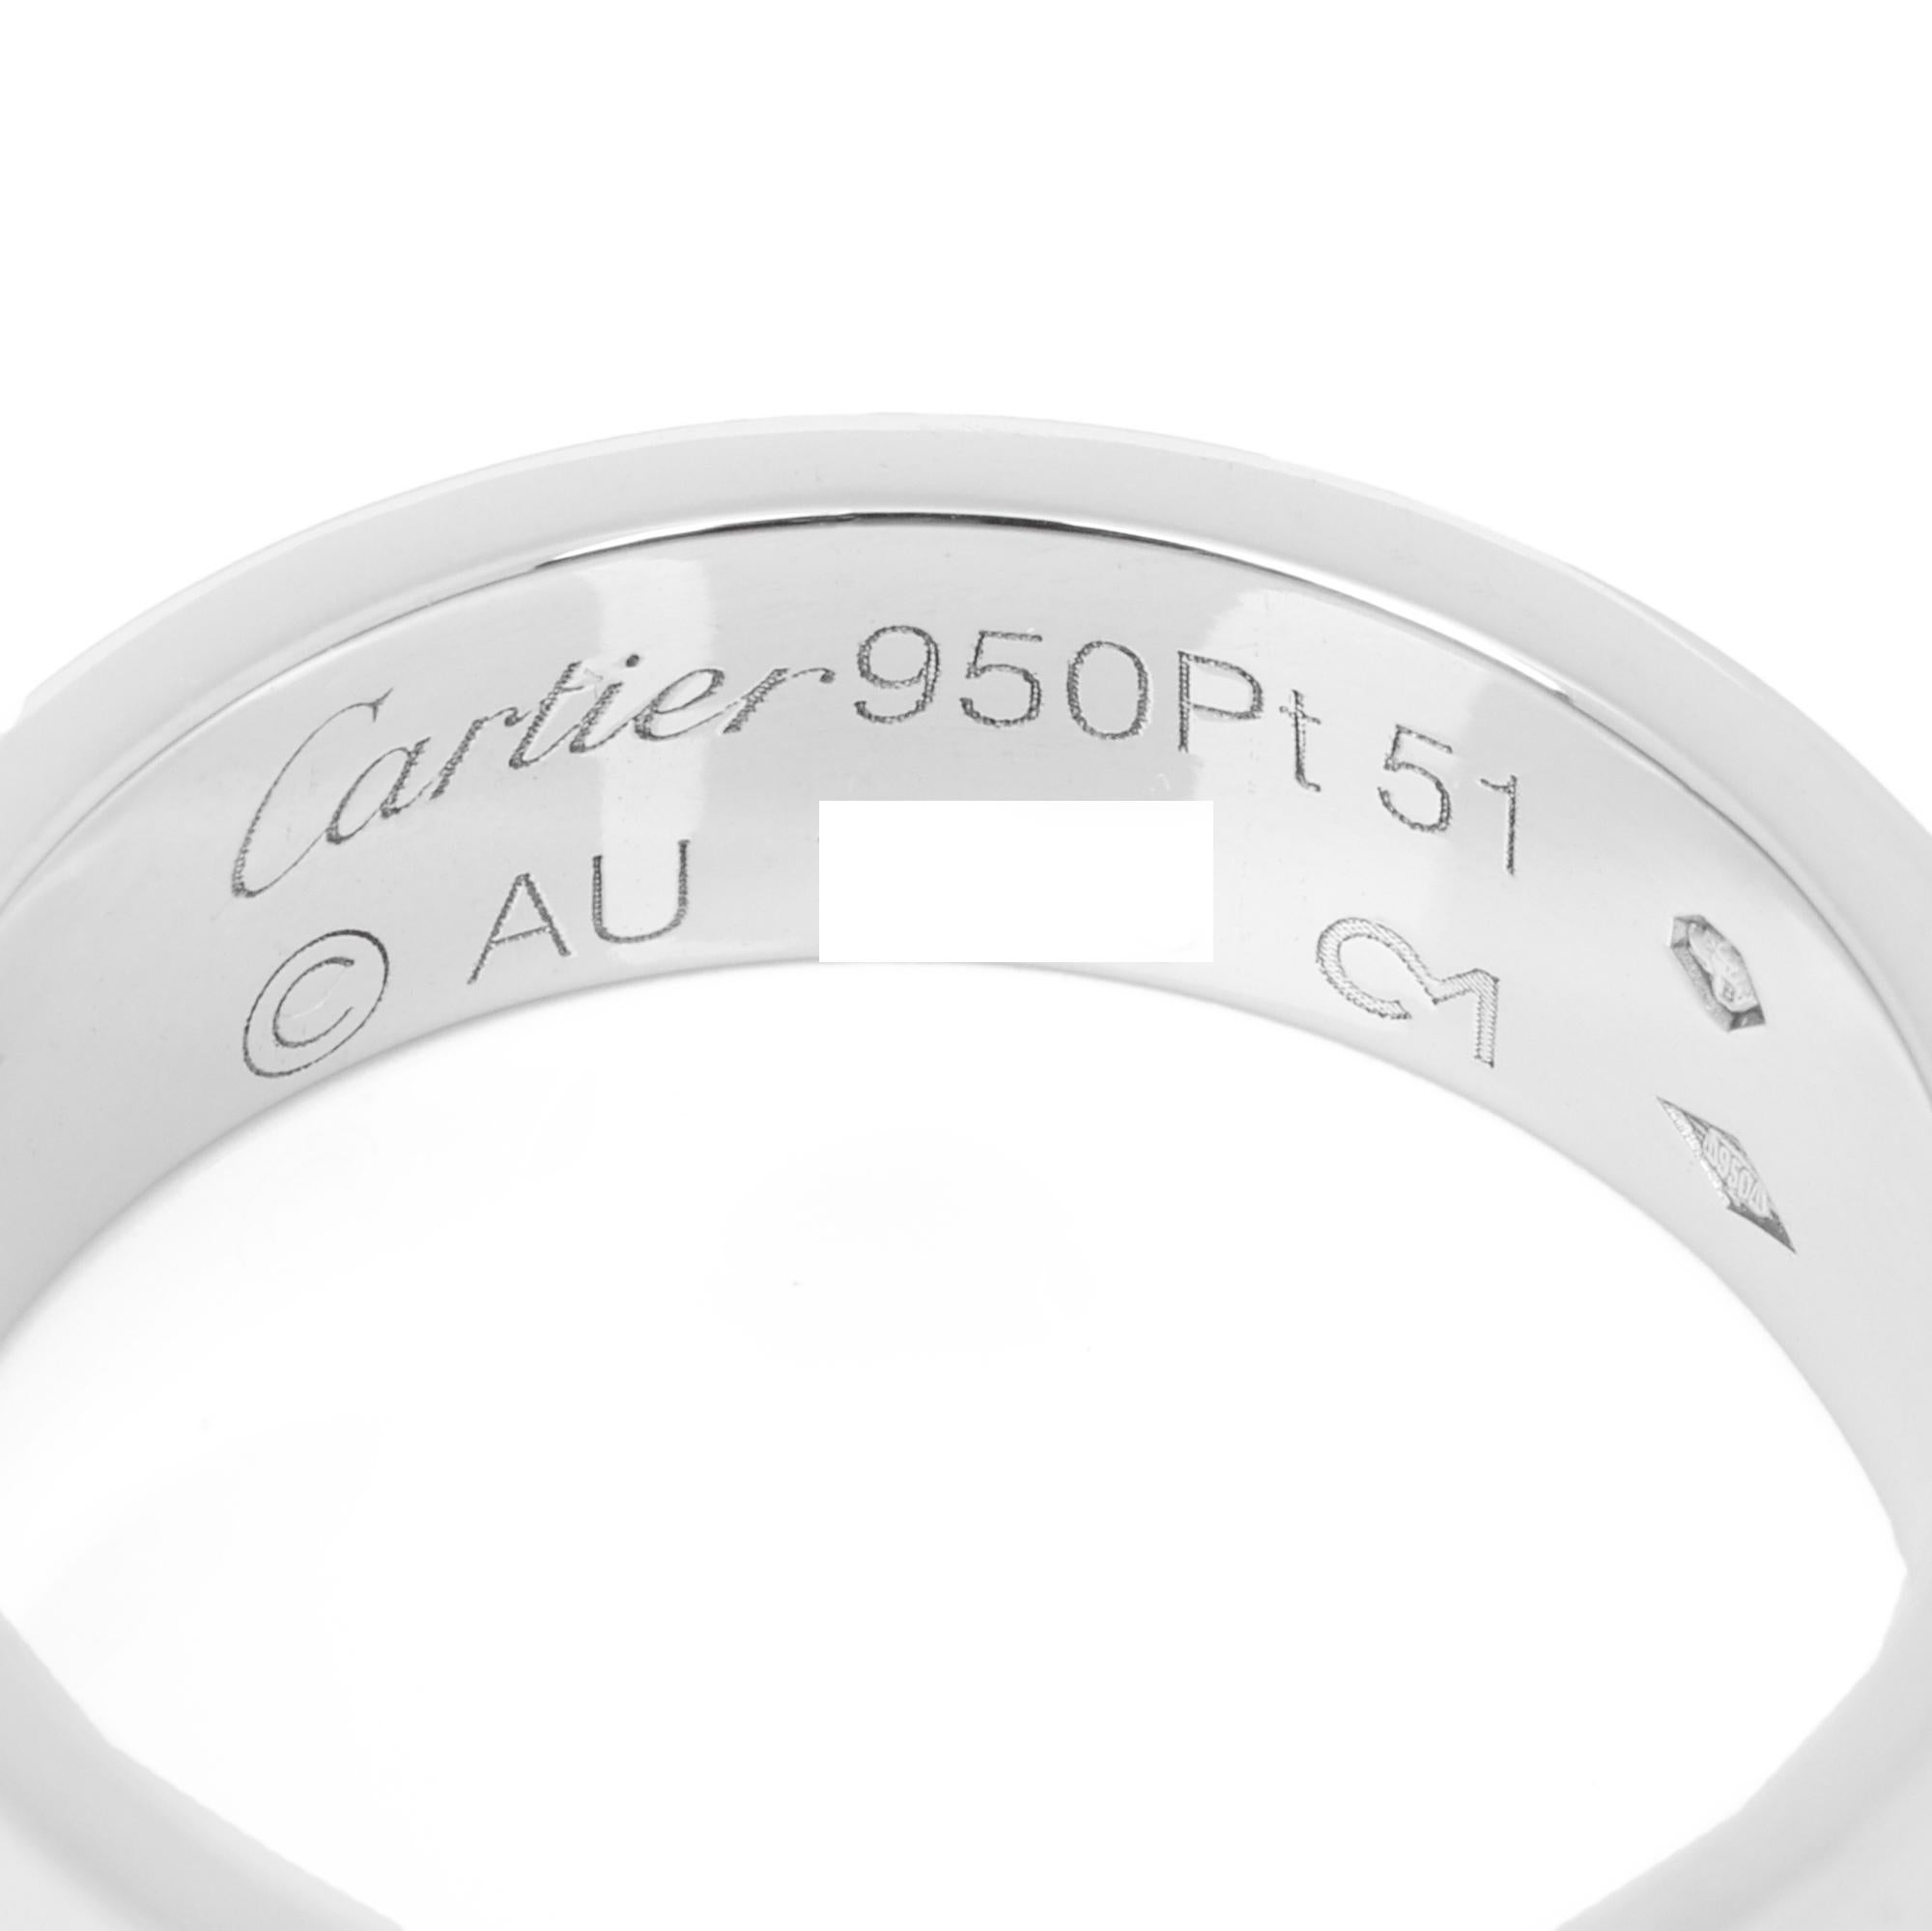 Cartier Platinum Love Band Ring

Brand Cartier
Model Platinum Love Band Ring
Product Type Ring
Serial Number AU****
Material(s) Platinum
UK Ring Size L
EU Ring Size 51
US Ring Size 5 3/4
Resizing Possible No
Band Width 5.4mm
Total Weight 8.3g
Model